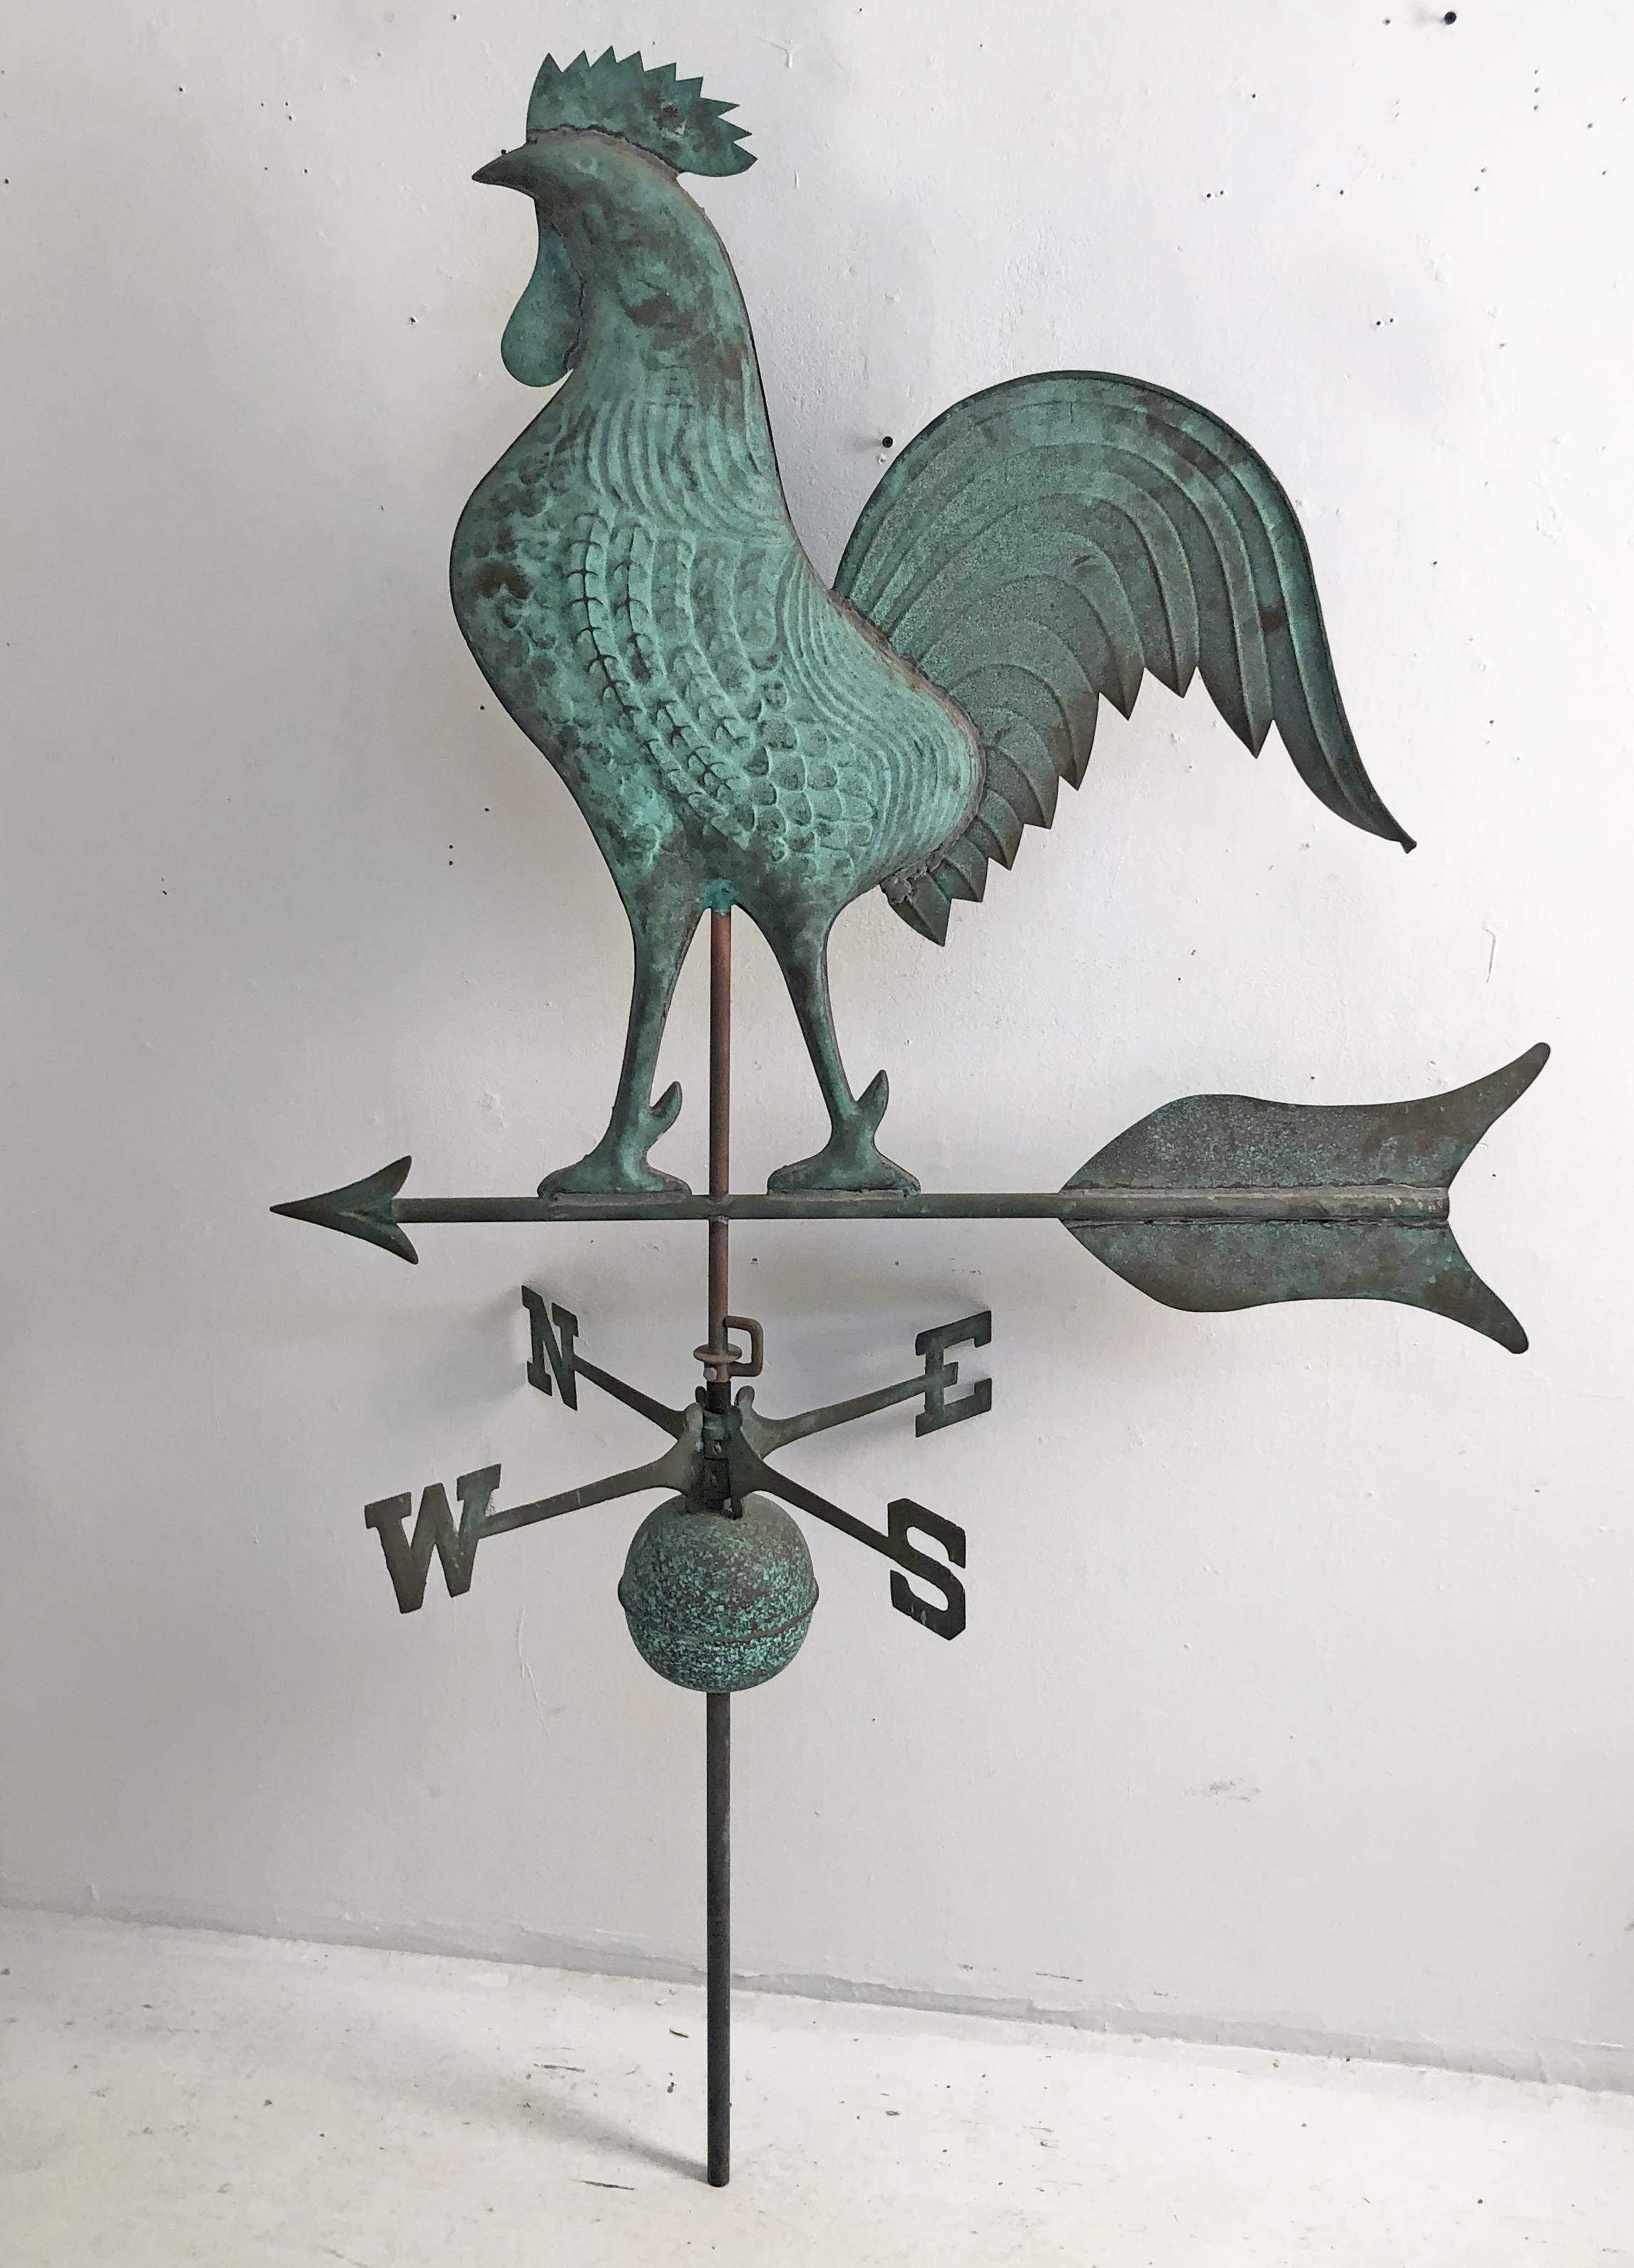 COPPER WEATHER VANE OF ROOSTER 2c8922